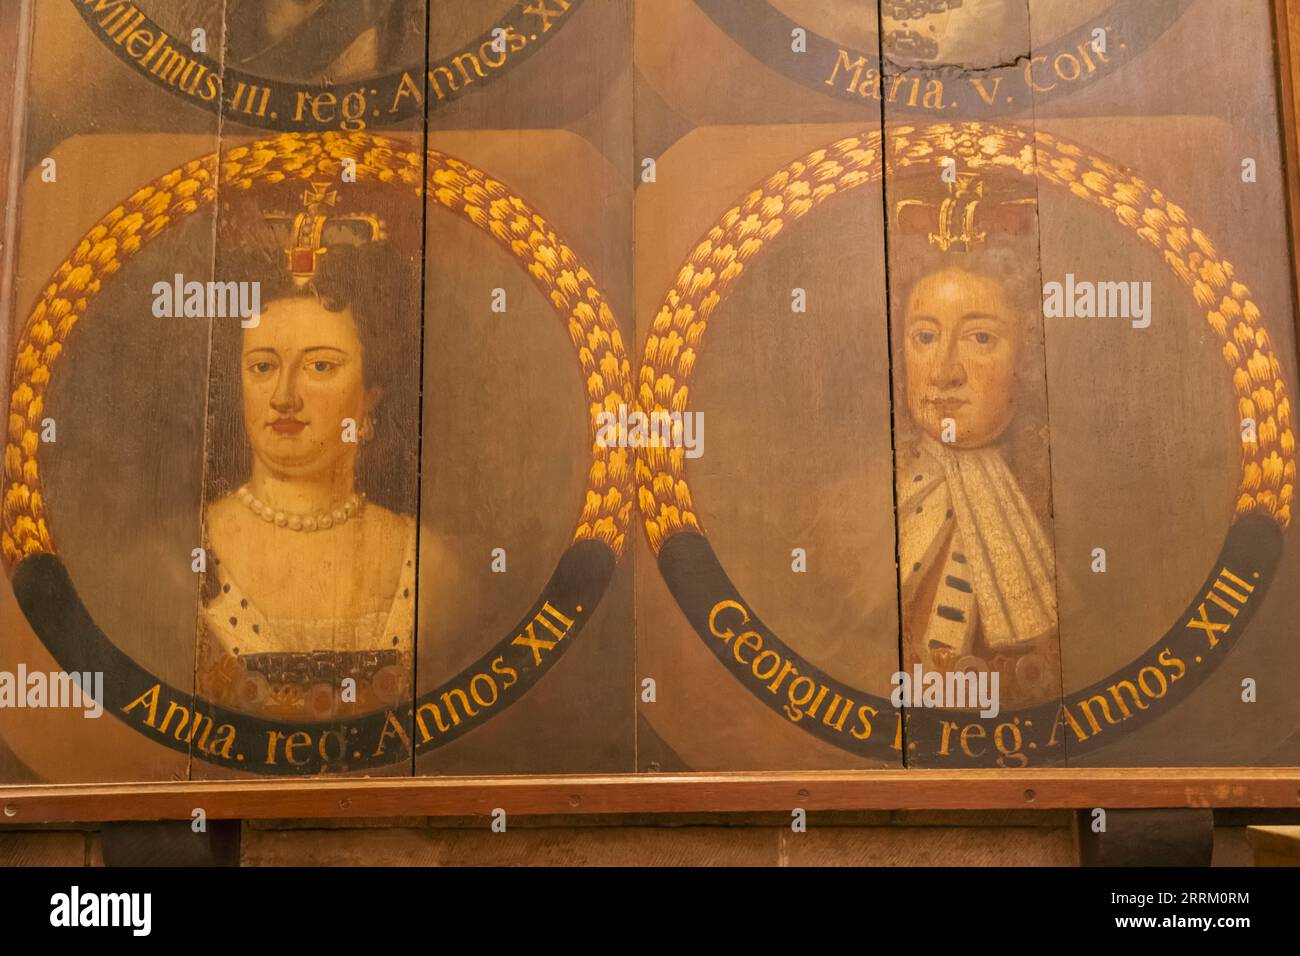 England, Sussex, West Sussex, Chichester, Chichester Cathedral, Interior View of Medieval Painted Paneal depicting Portrait of Queen Anne and King George 1 Stock Photo